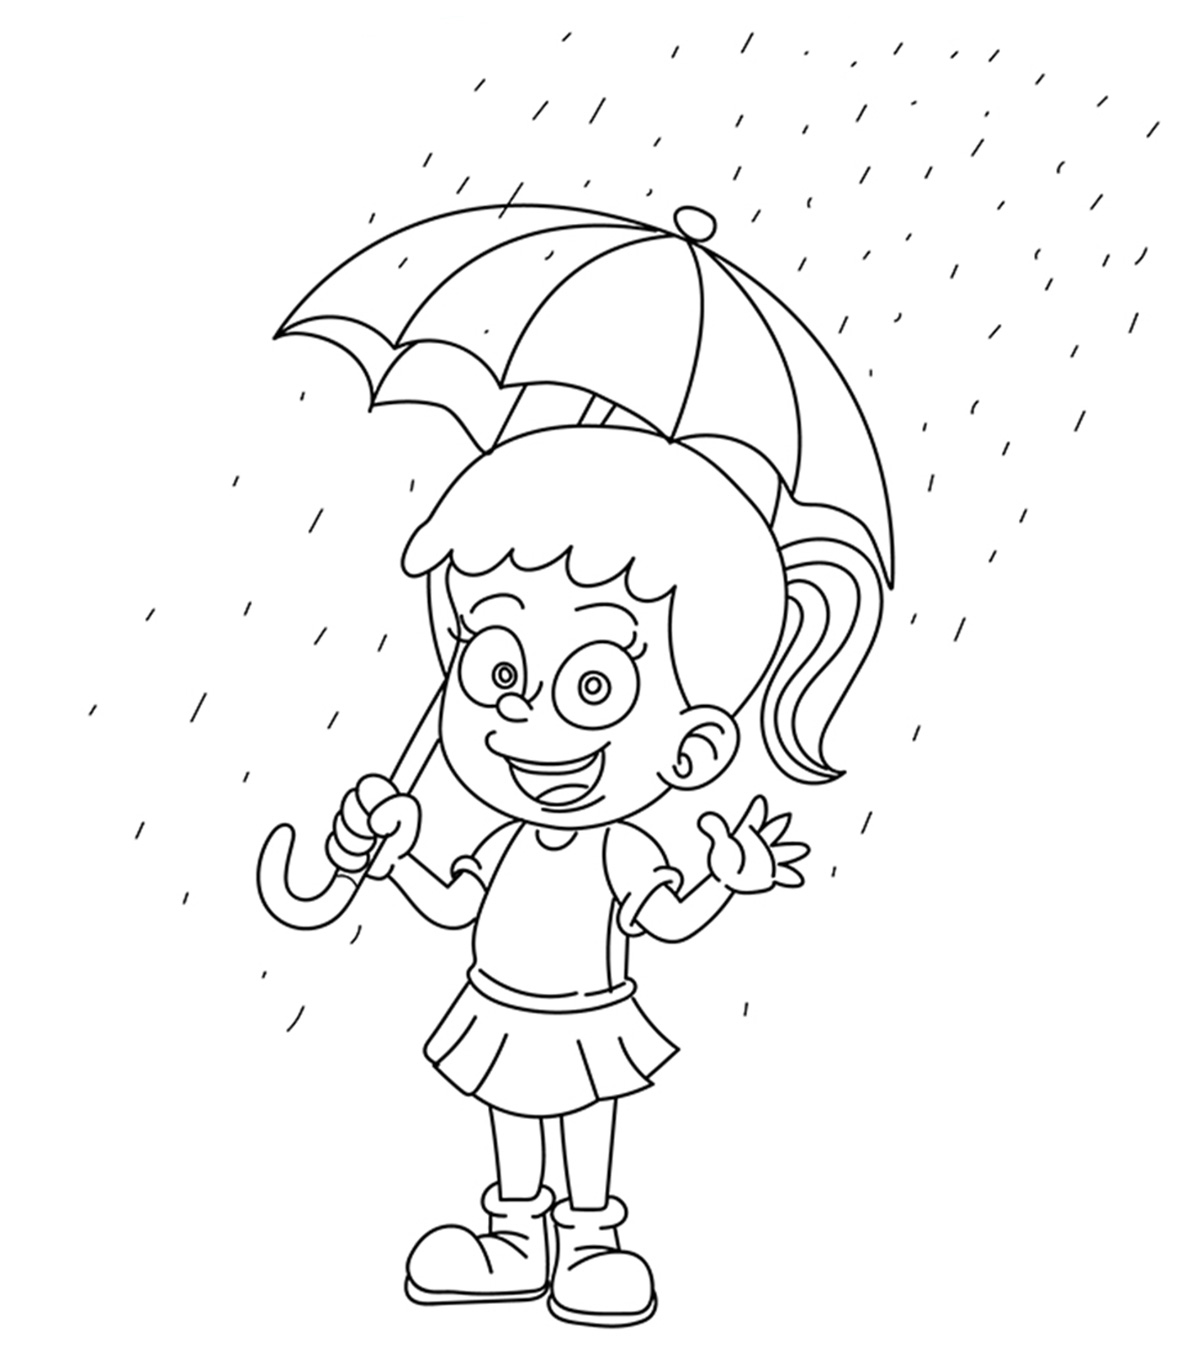 4400 Top Coloring Pages Rain For Free